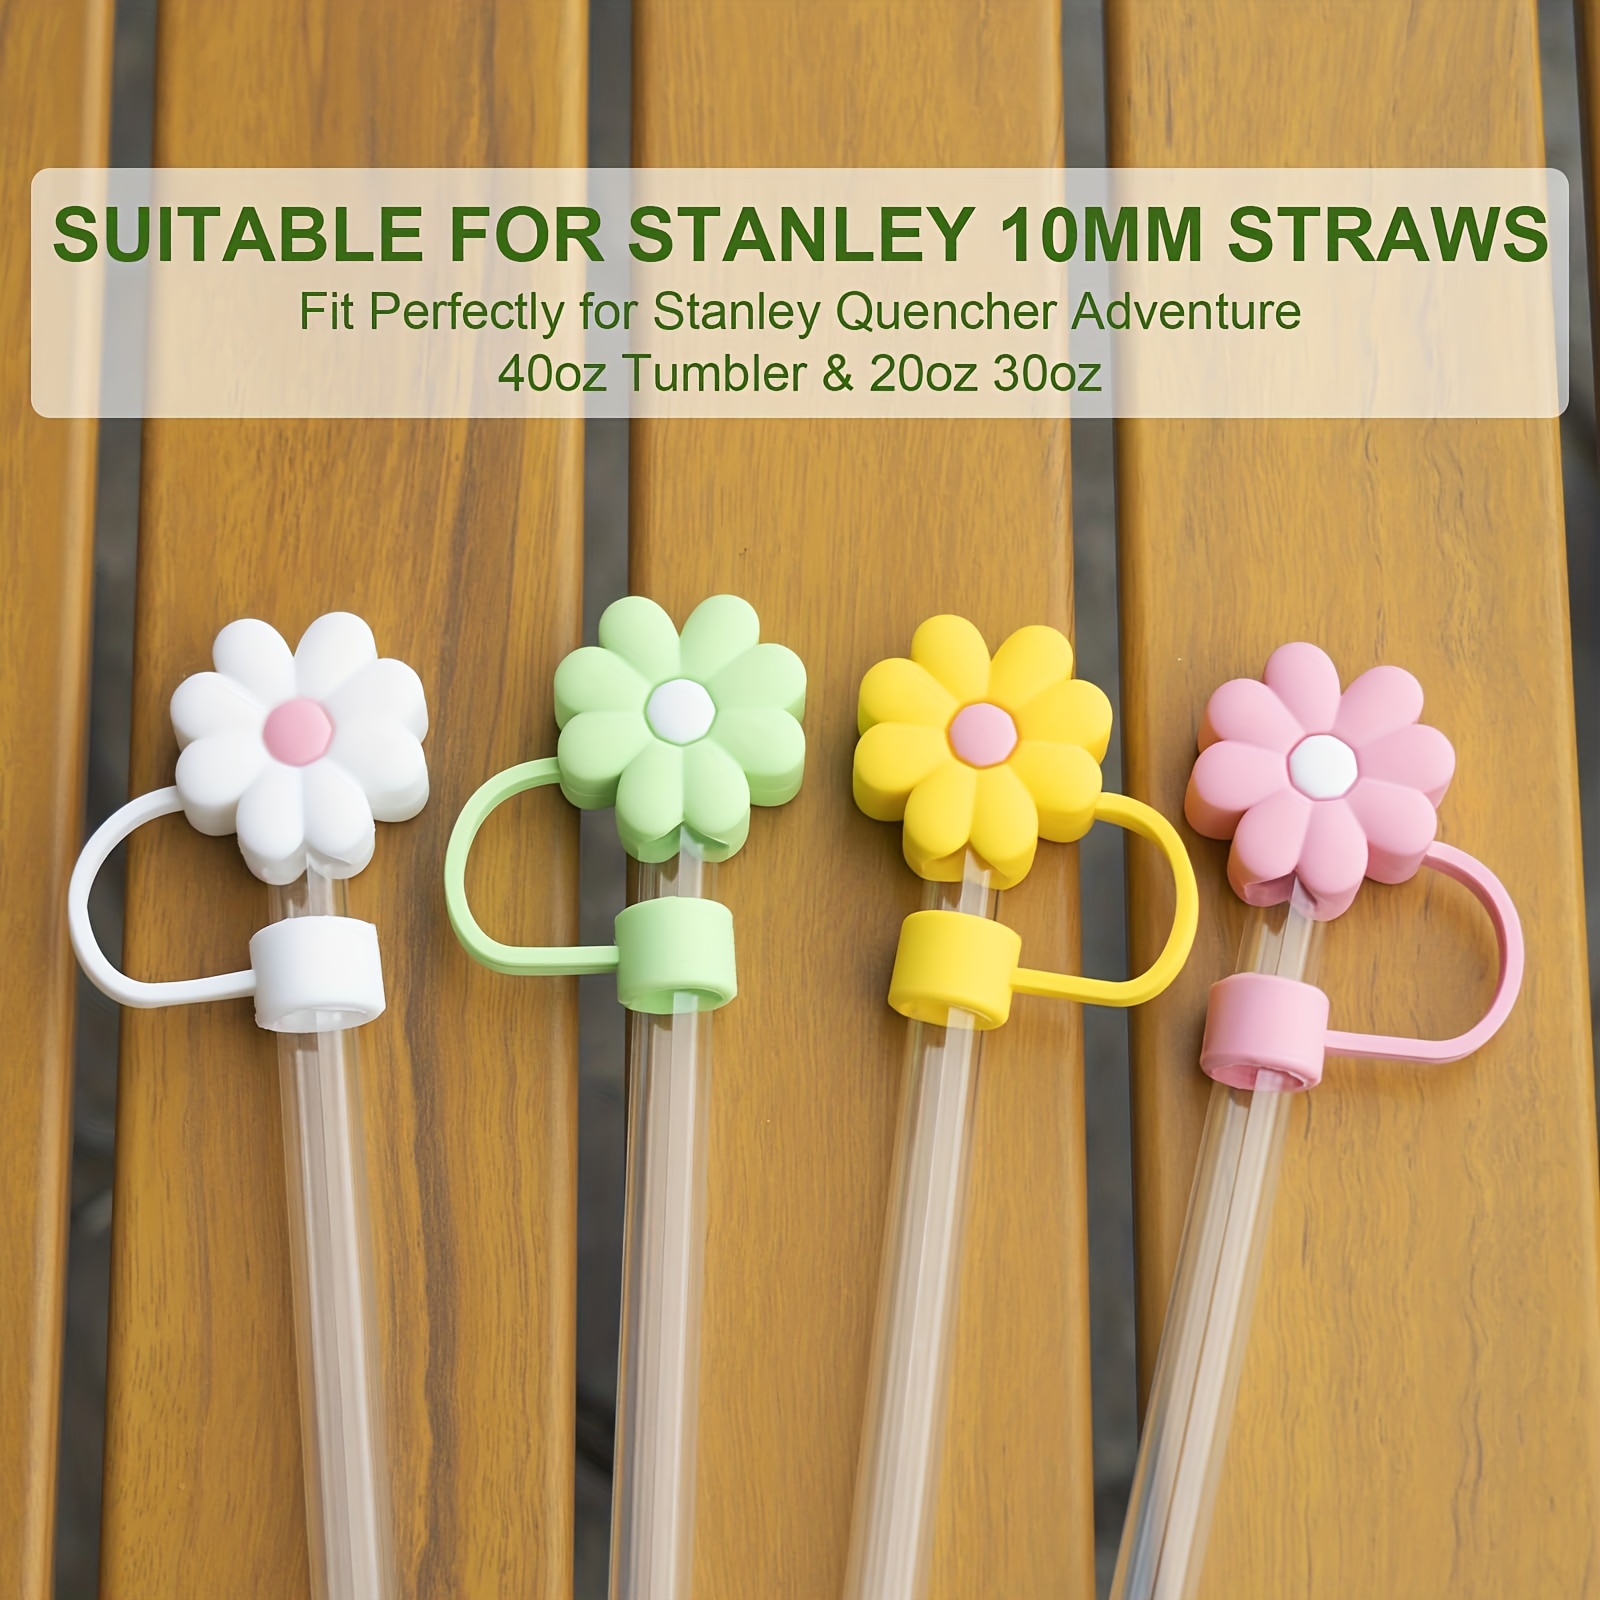 4 Pack Compatible with Stanley 30&40 Oz Tumbler, 10mm Flower Straw Covers  Cap, Cute Silicone Straw Covers, Straw Protectors, Various Shapes Soft